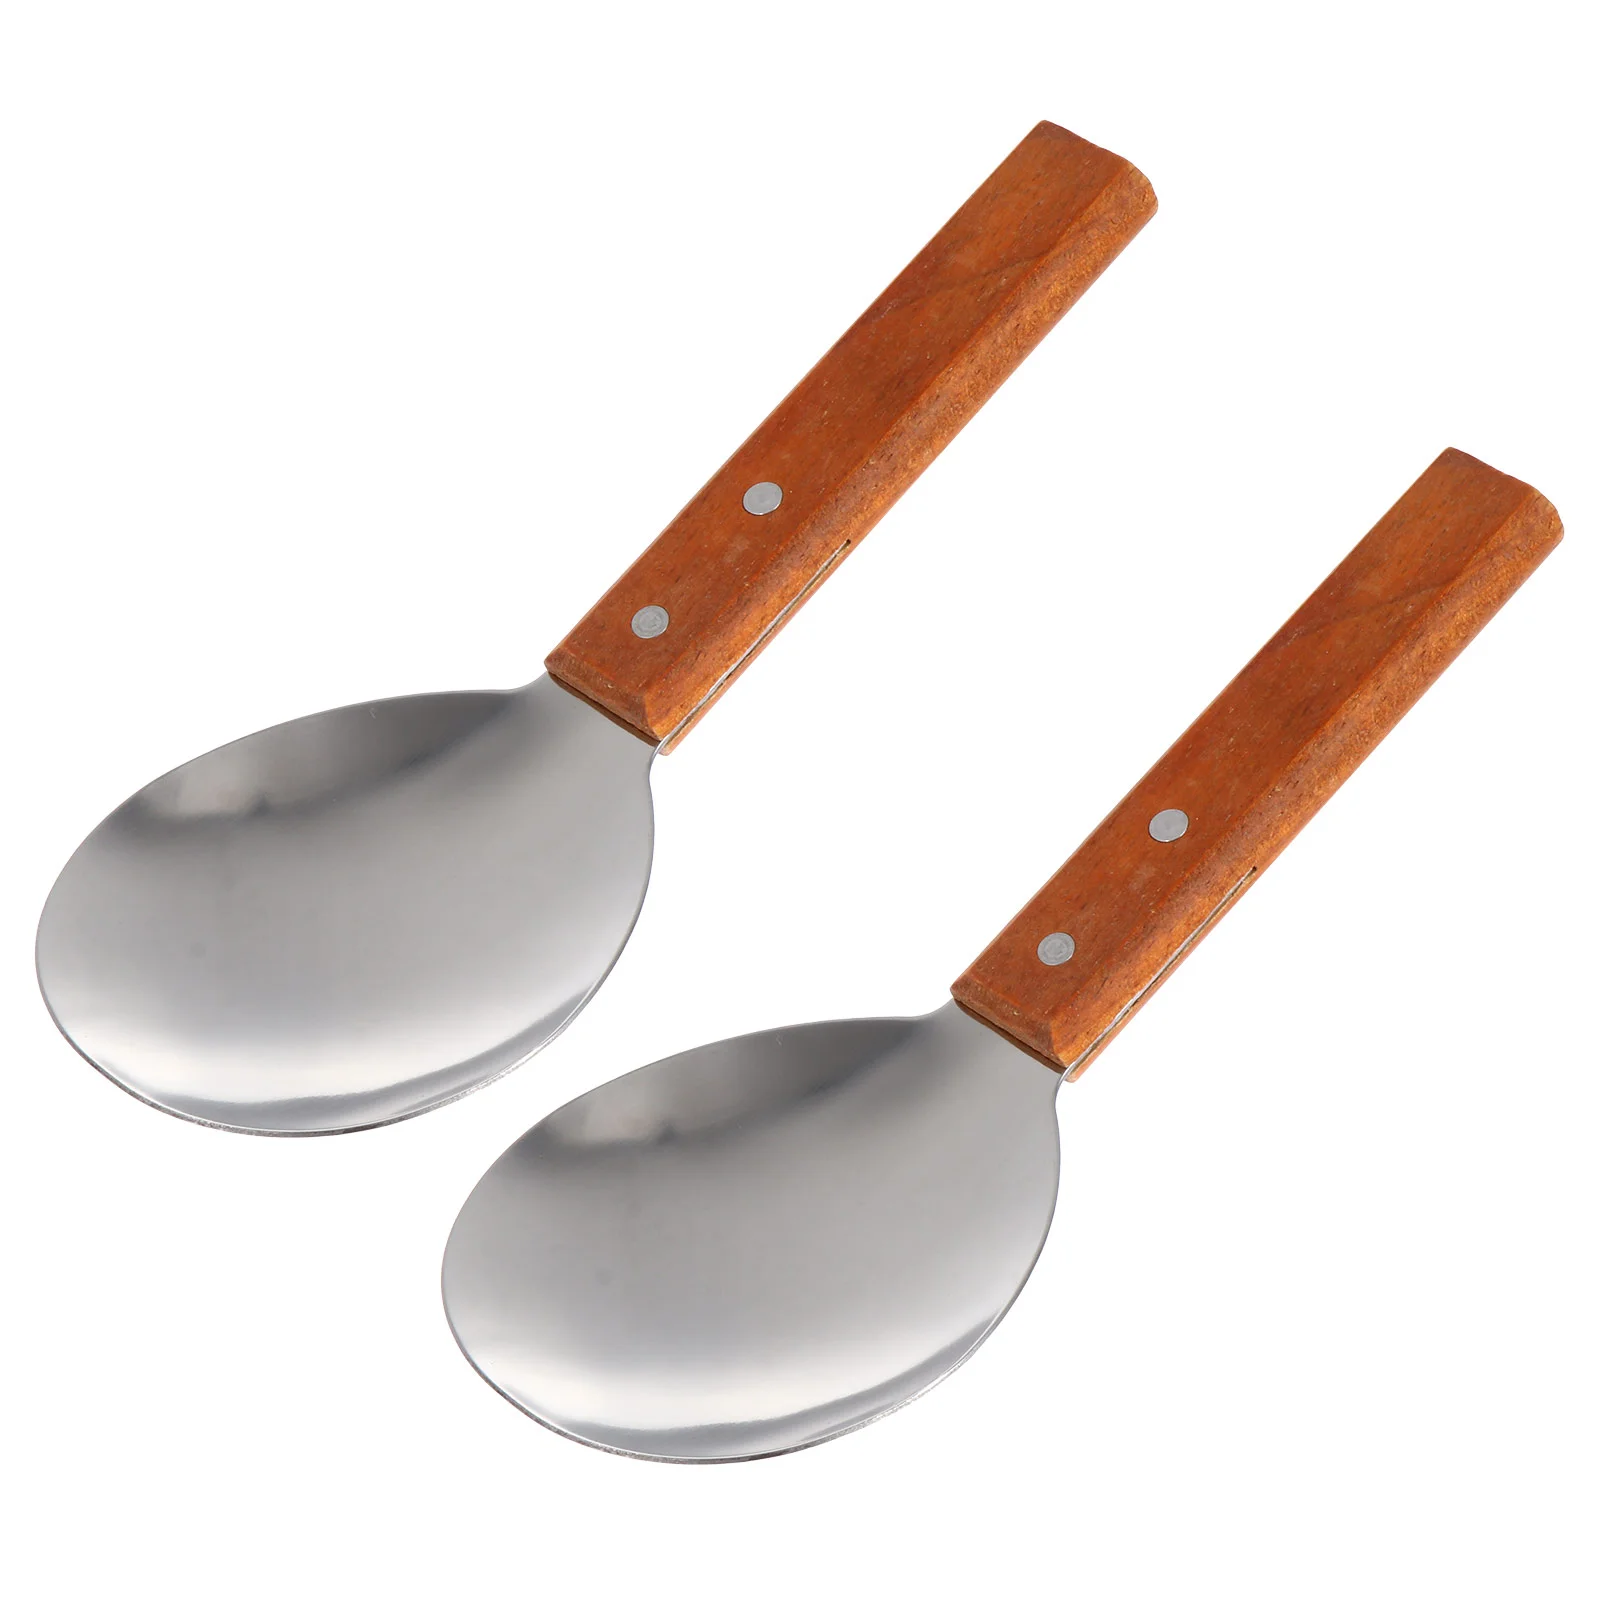 

2 Pcs Rice Spoon Cooking Scoops Asian Soup Spoons Big Spoon Non-stick Spoons Stainless Steel Home Kitchen Spoons Asian Rice